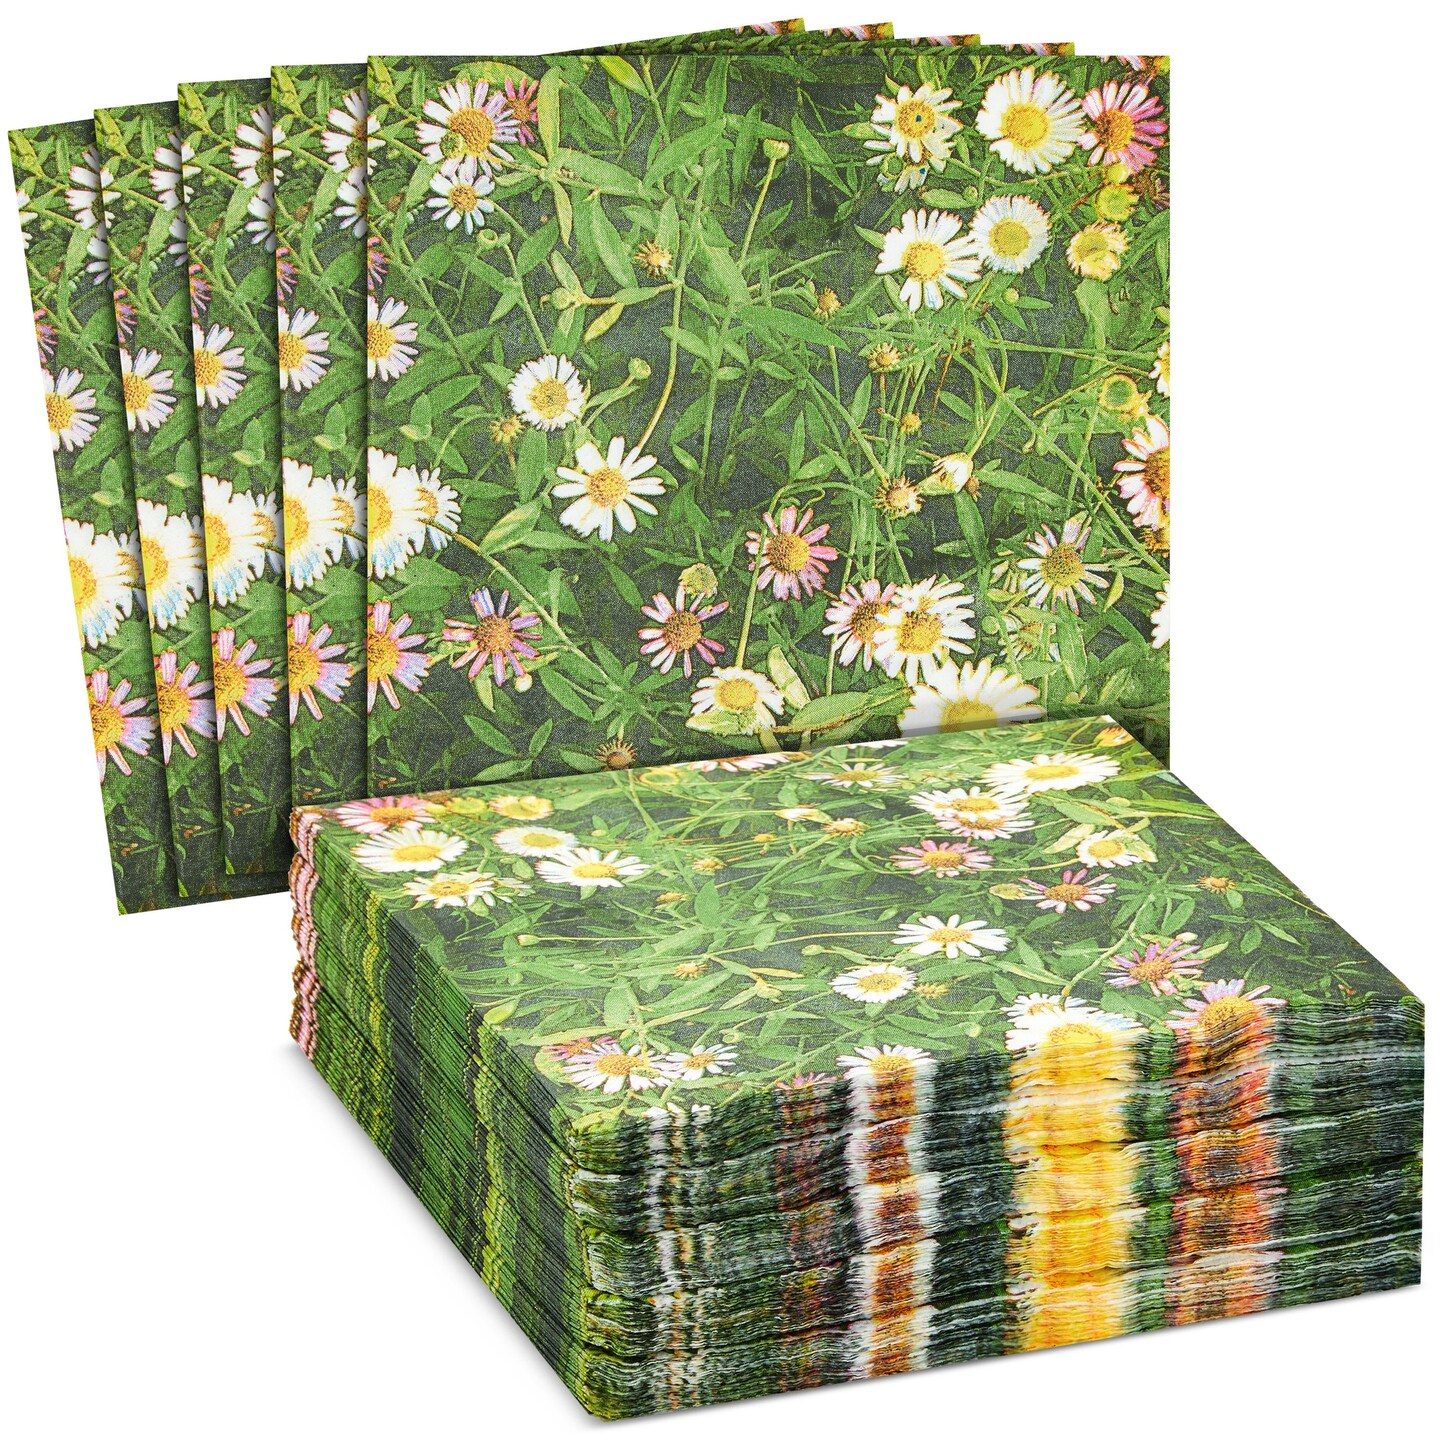 100 Pack Daisy Floral Paper Napkins for Wedding, Birthday, Spring Garden Party (6.5 In)